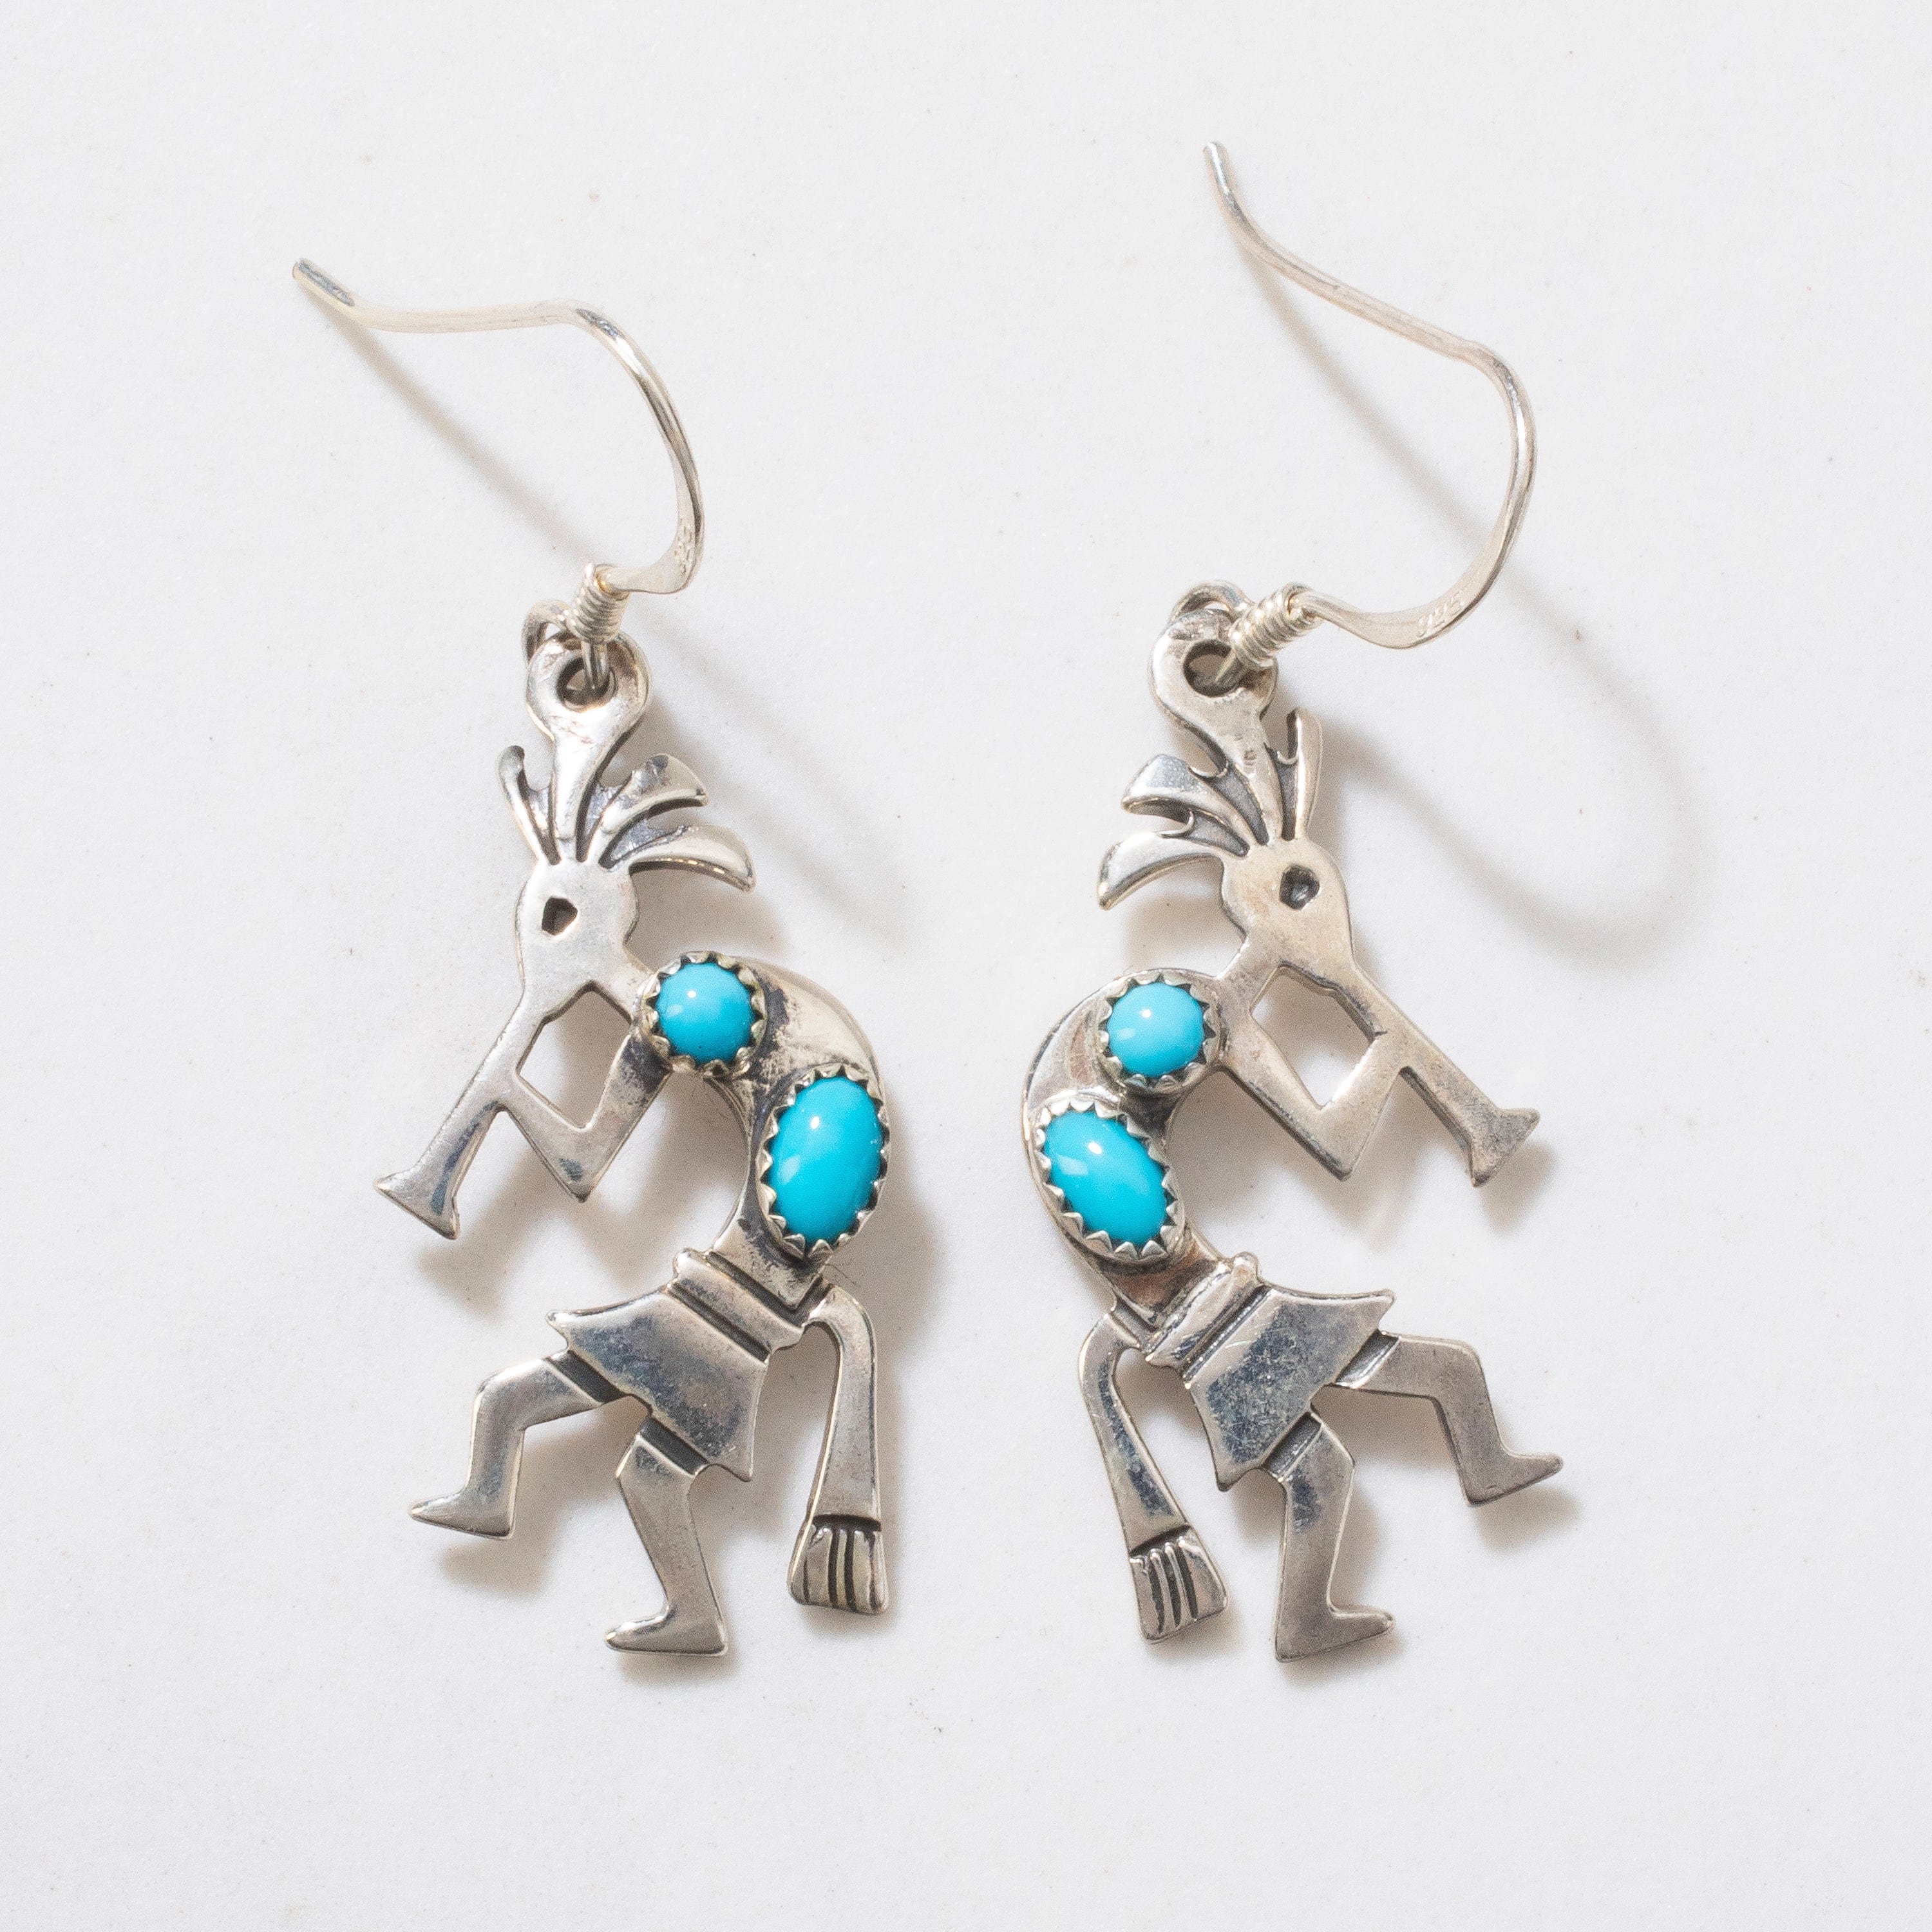 Kalifano Native American Jewelry Sleeping Beauty Turquoise Kokopelli Navajo USA Native American Made 925 Sterling Silver Earrings with French Hook NAE200.012